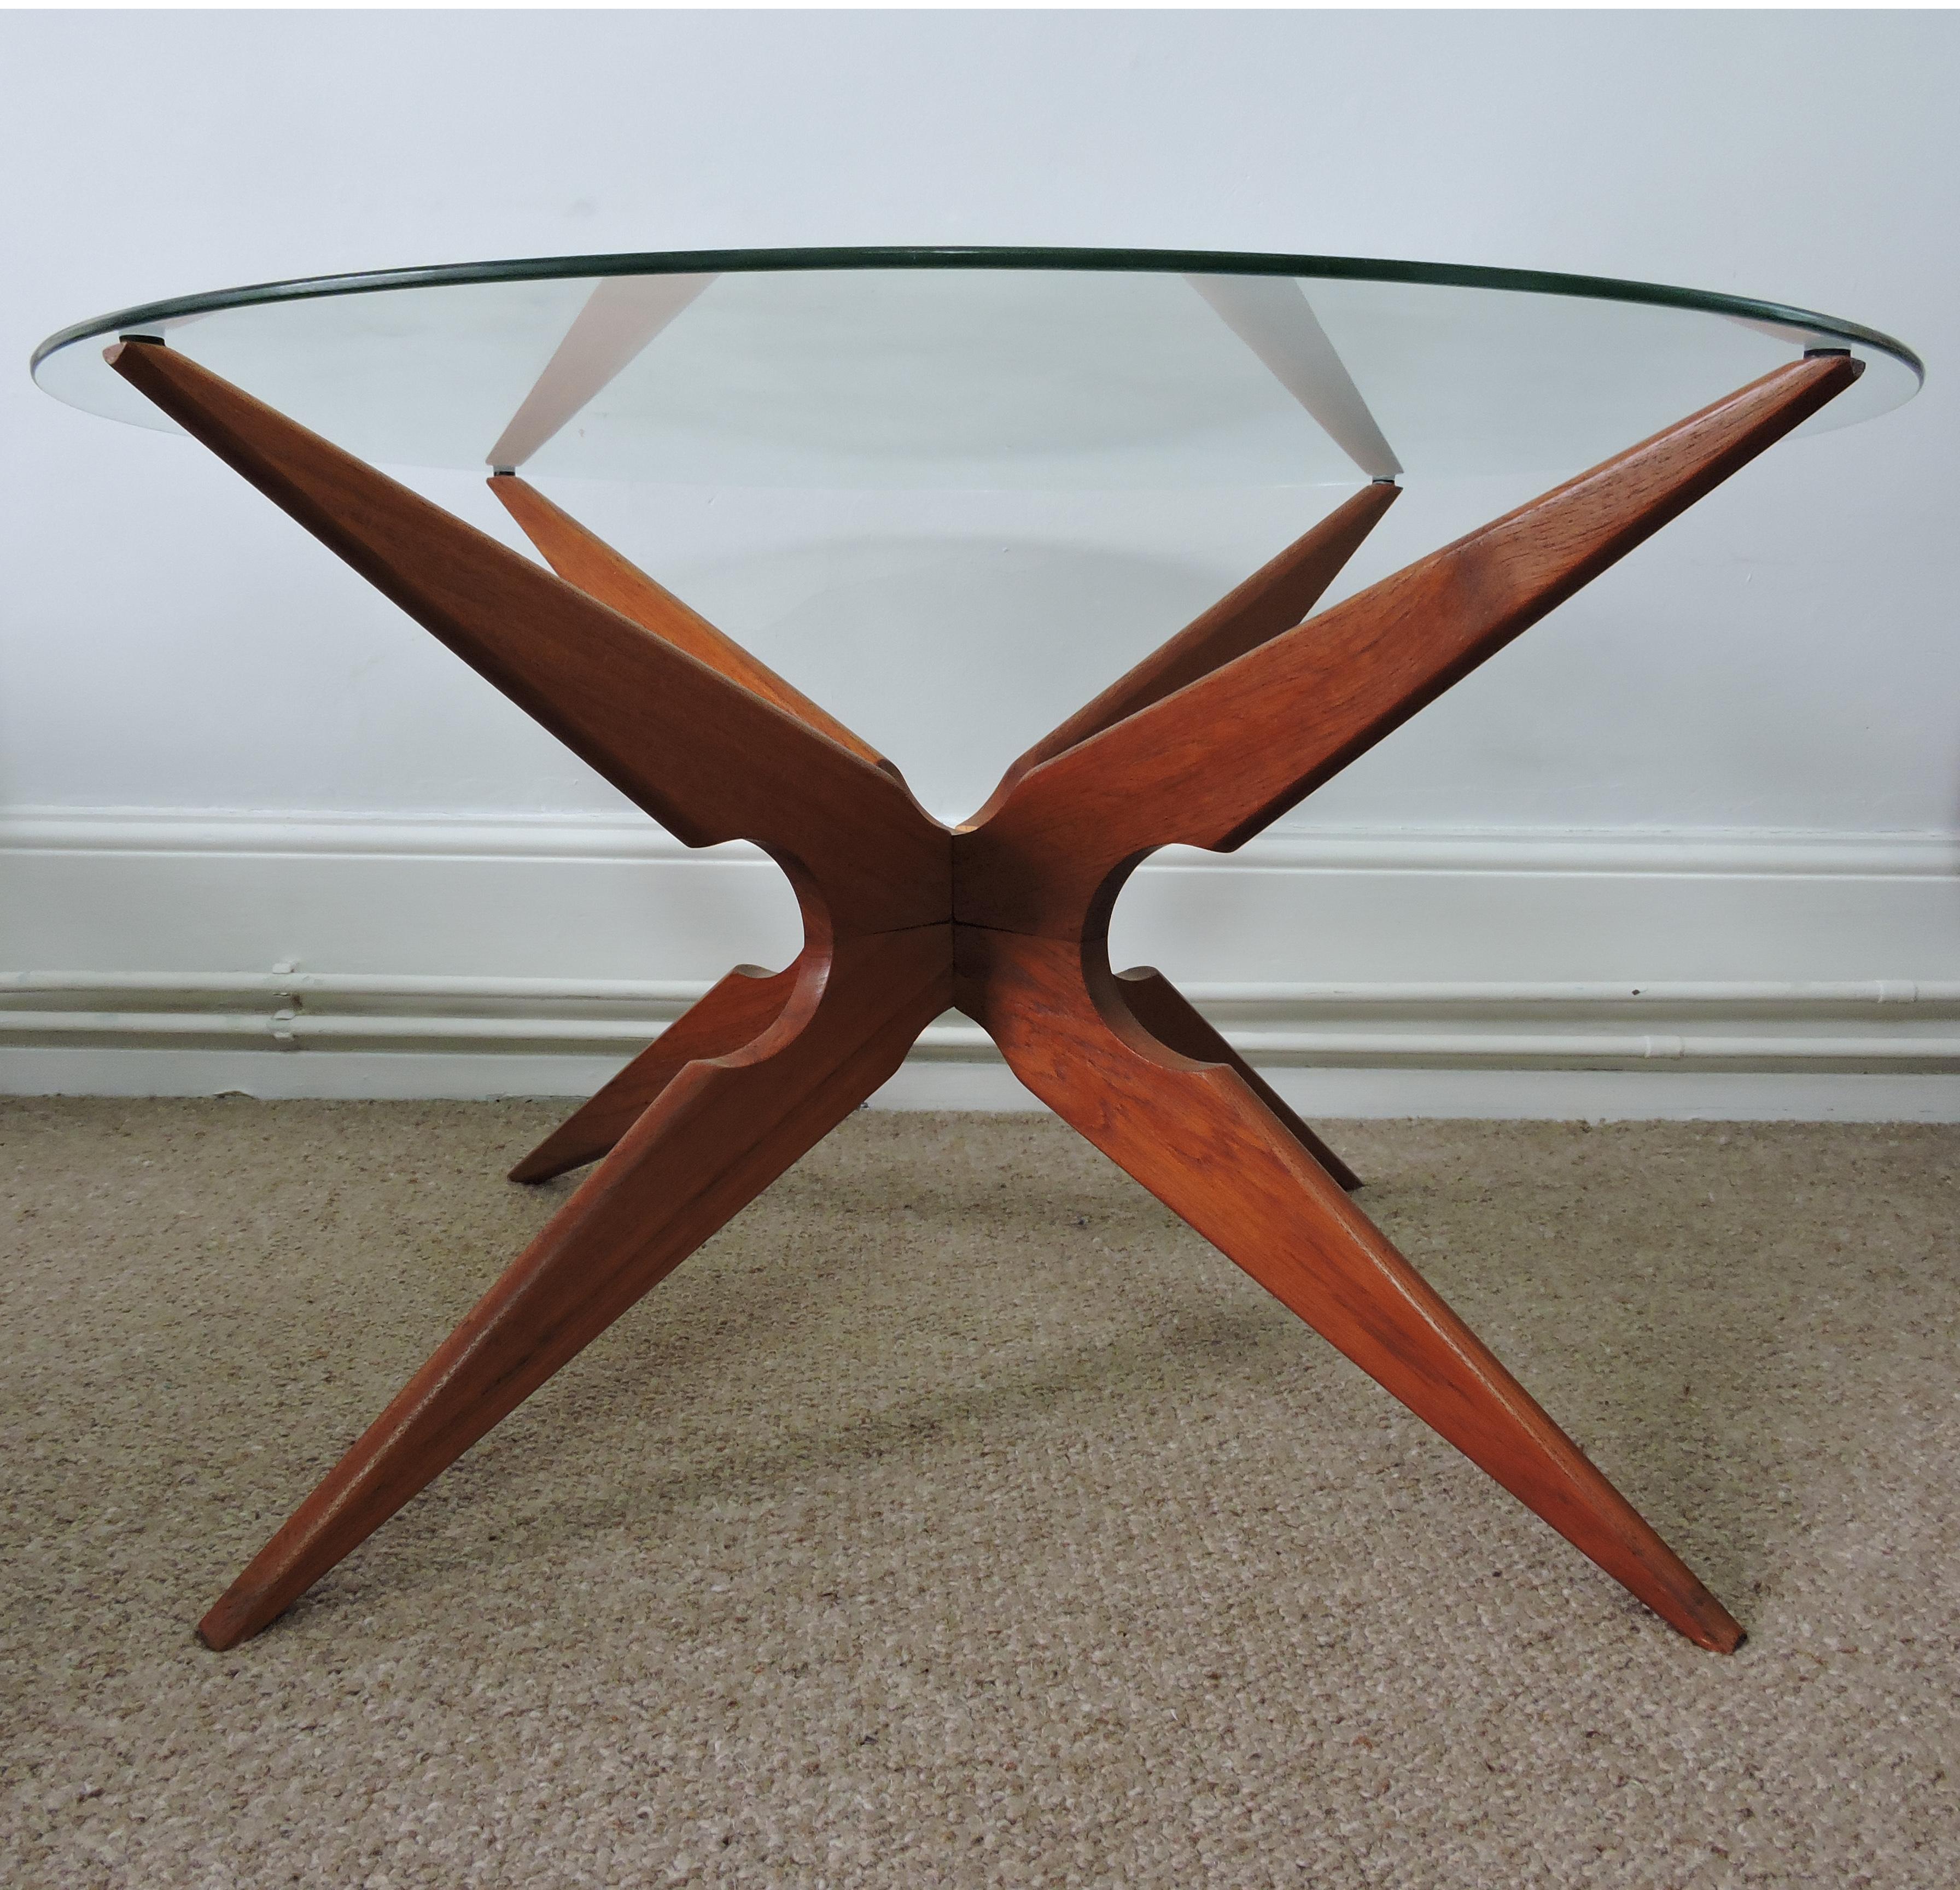 Mid-Century Modern Danish Teak Spider Leg Coffee Table by Sika Mobler, 1960s For Sale